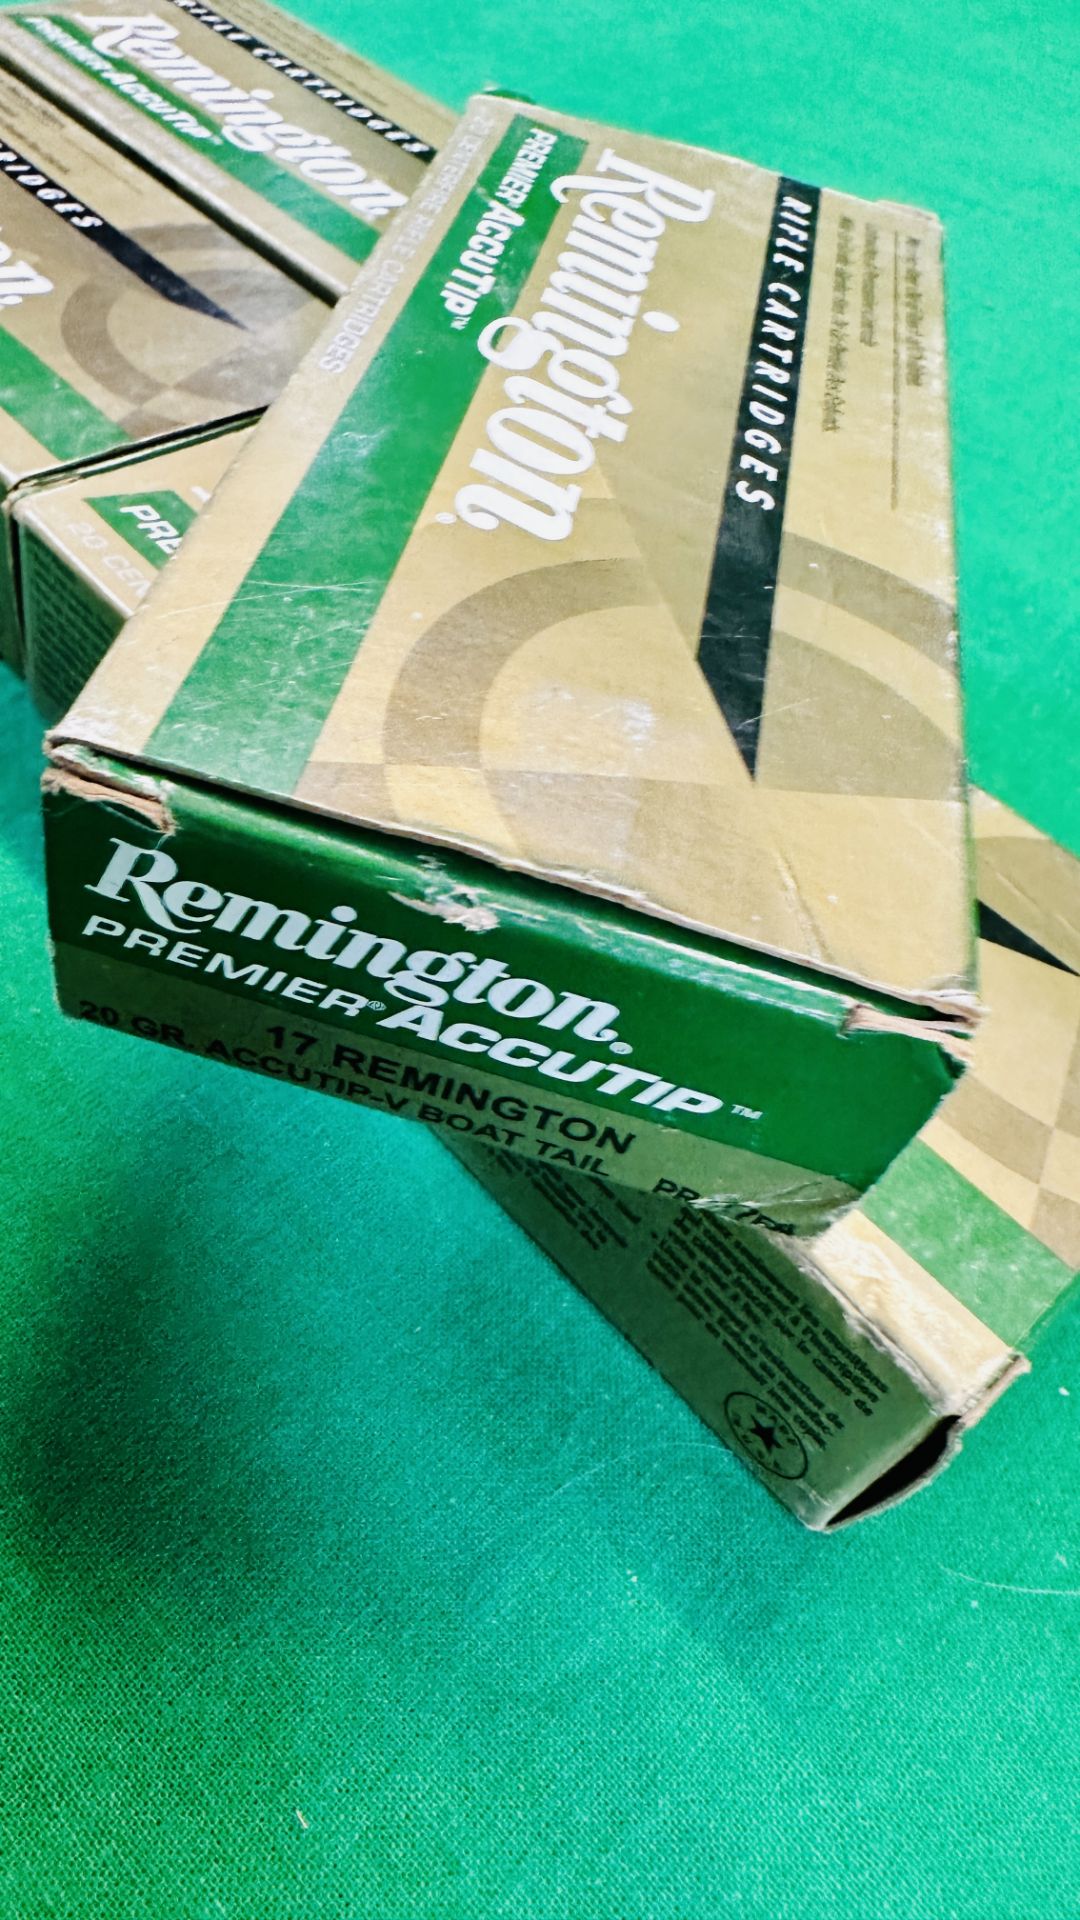 80 X REMINGTON 17 PREMIER ACCUTIP 20 GR RIFLE AMMUNITION - (REF: 1431) - (TO BE COLLECTED IN PERSON - Image 3 of 4